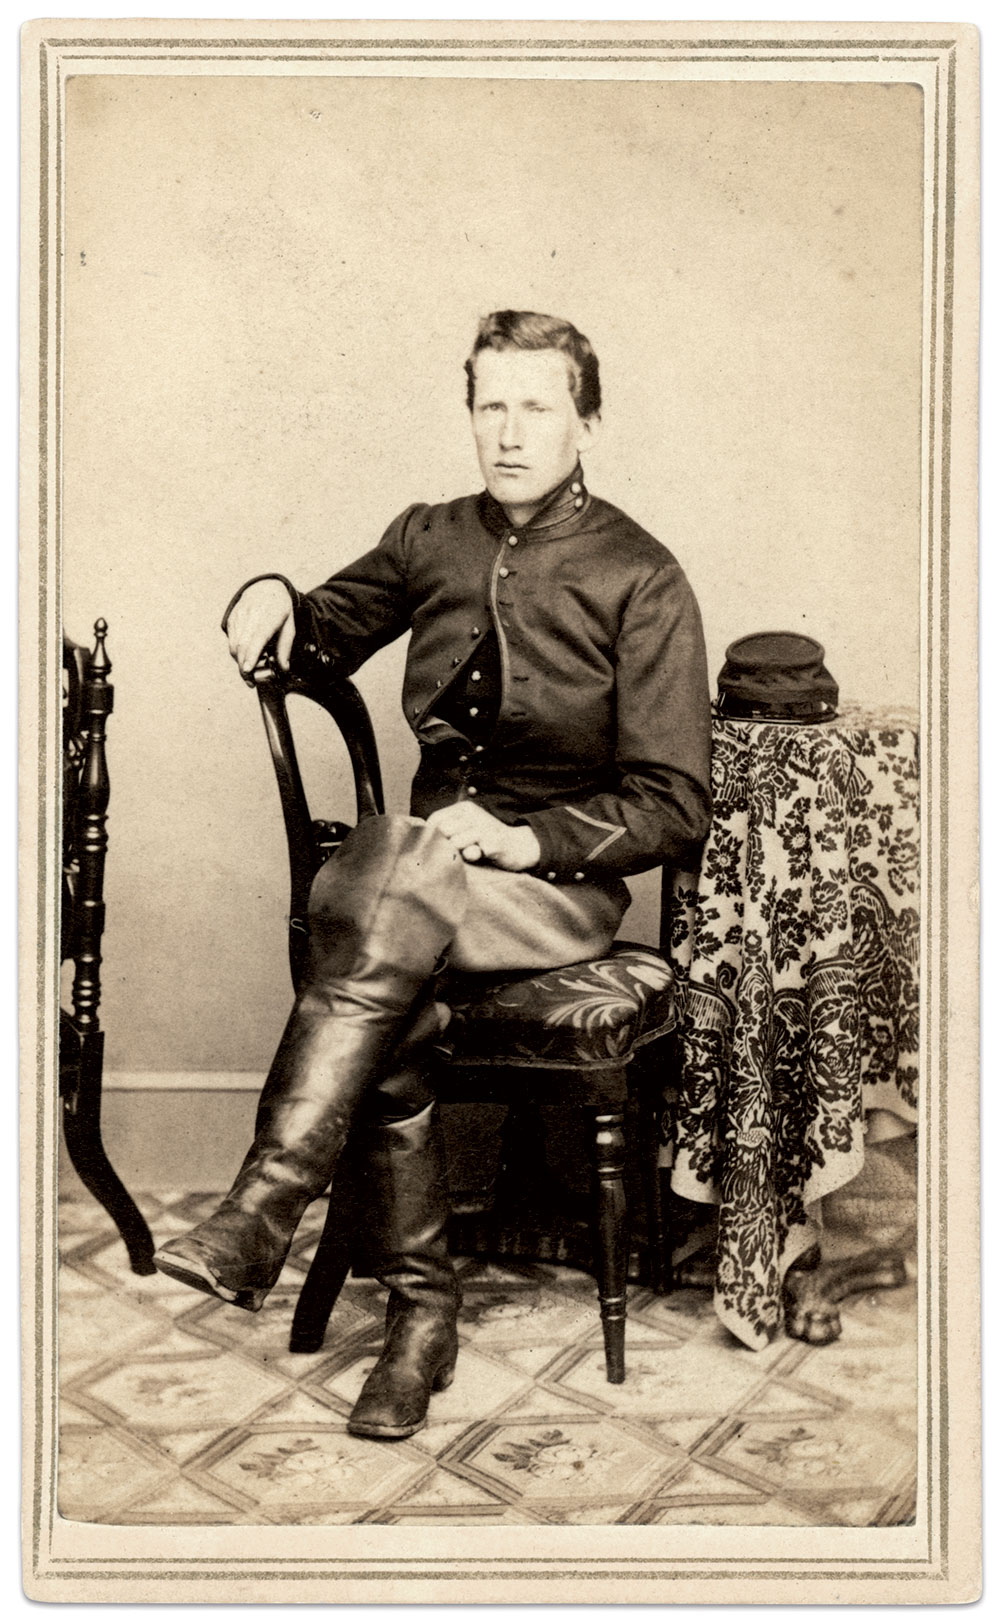 Carte de visite by George B. Billings  and Albyron E. Hough of Lebanon, N.H. Dave Morin Collection.